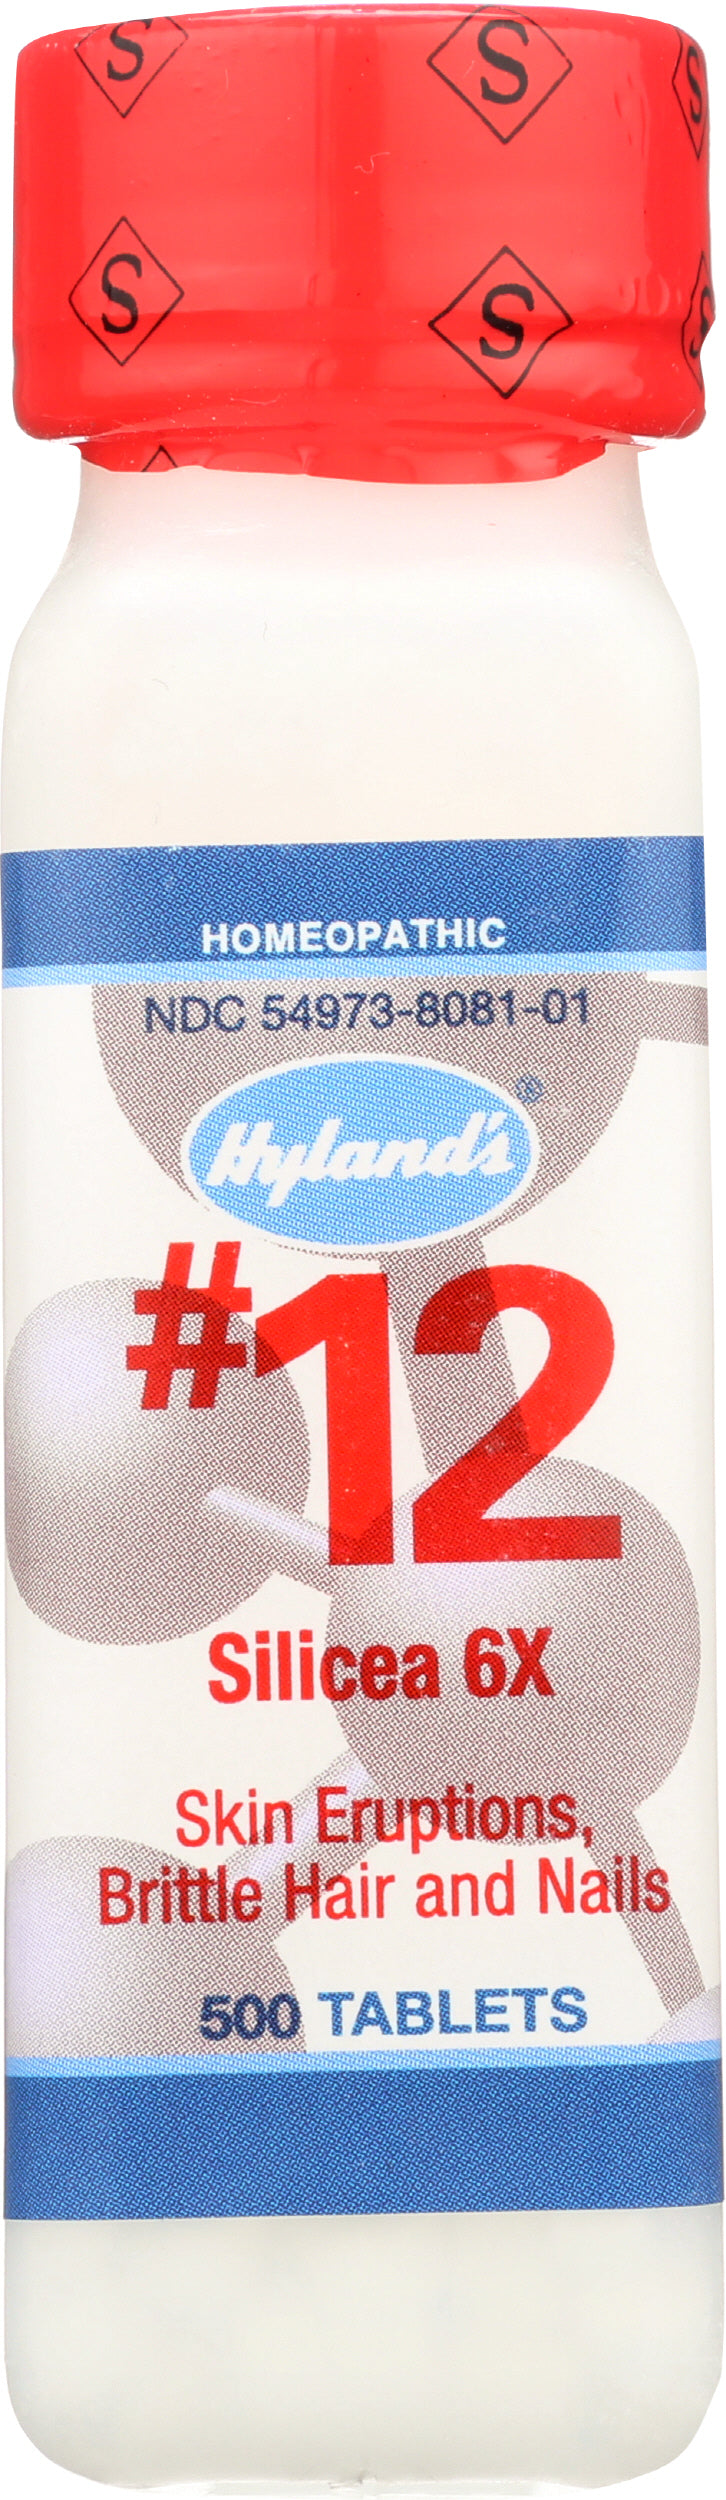 Hyland's #12 Silicea 6X 500 Tablets Front